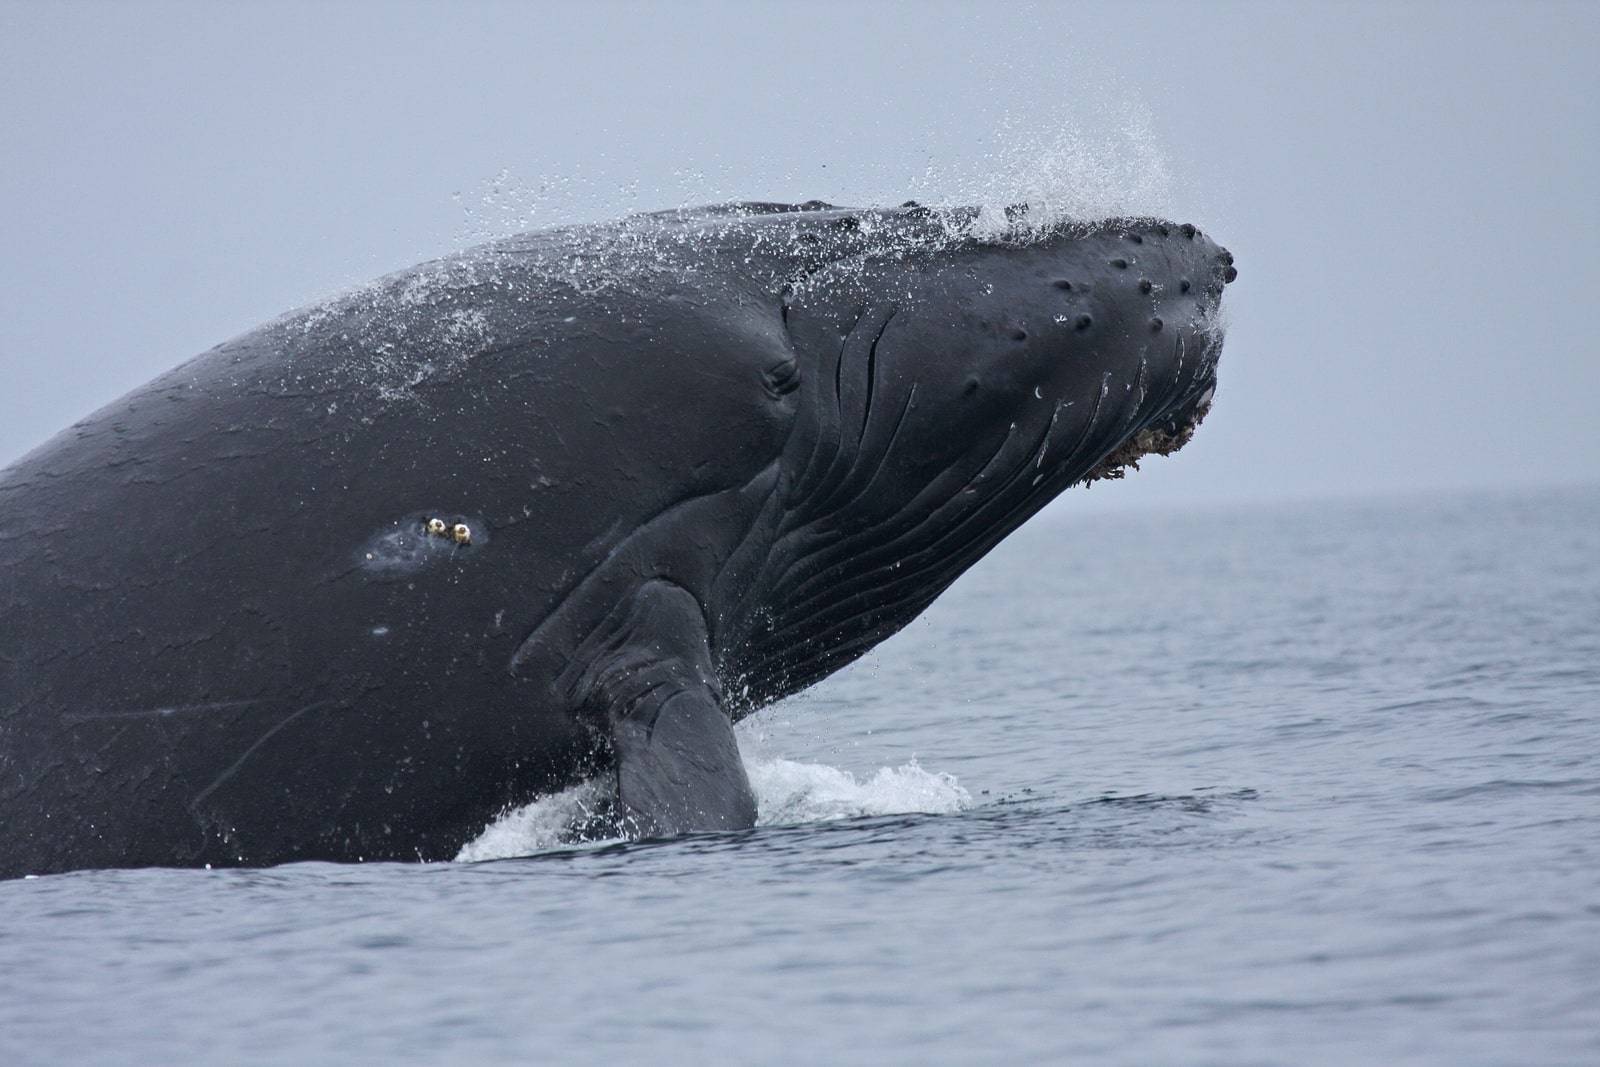 Forty foot long humpback whale